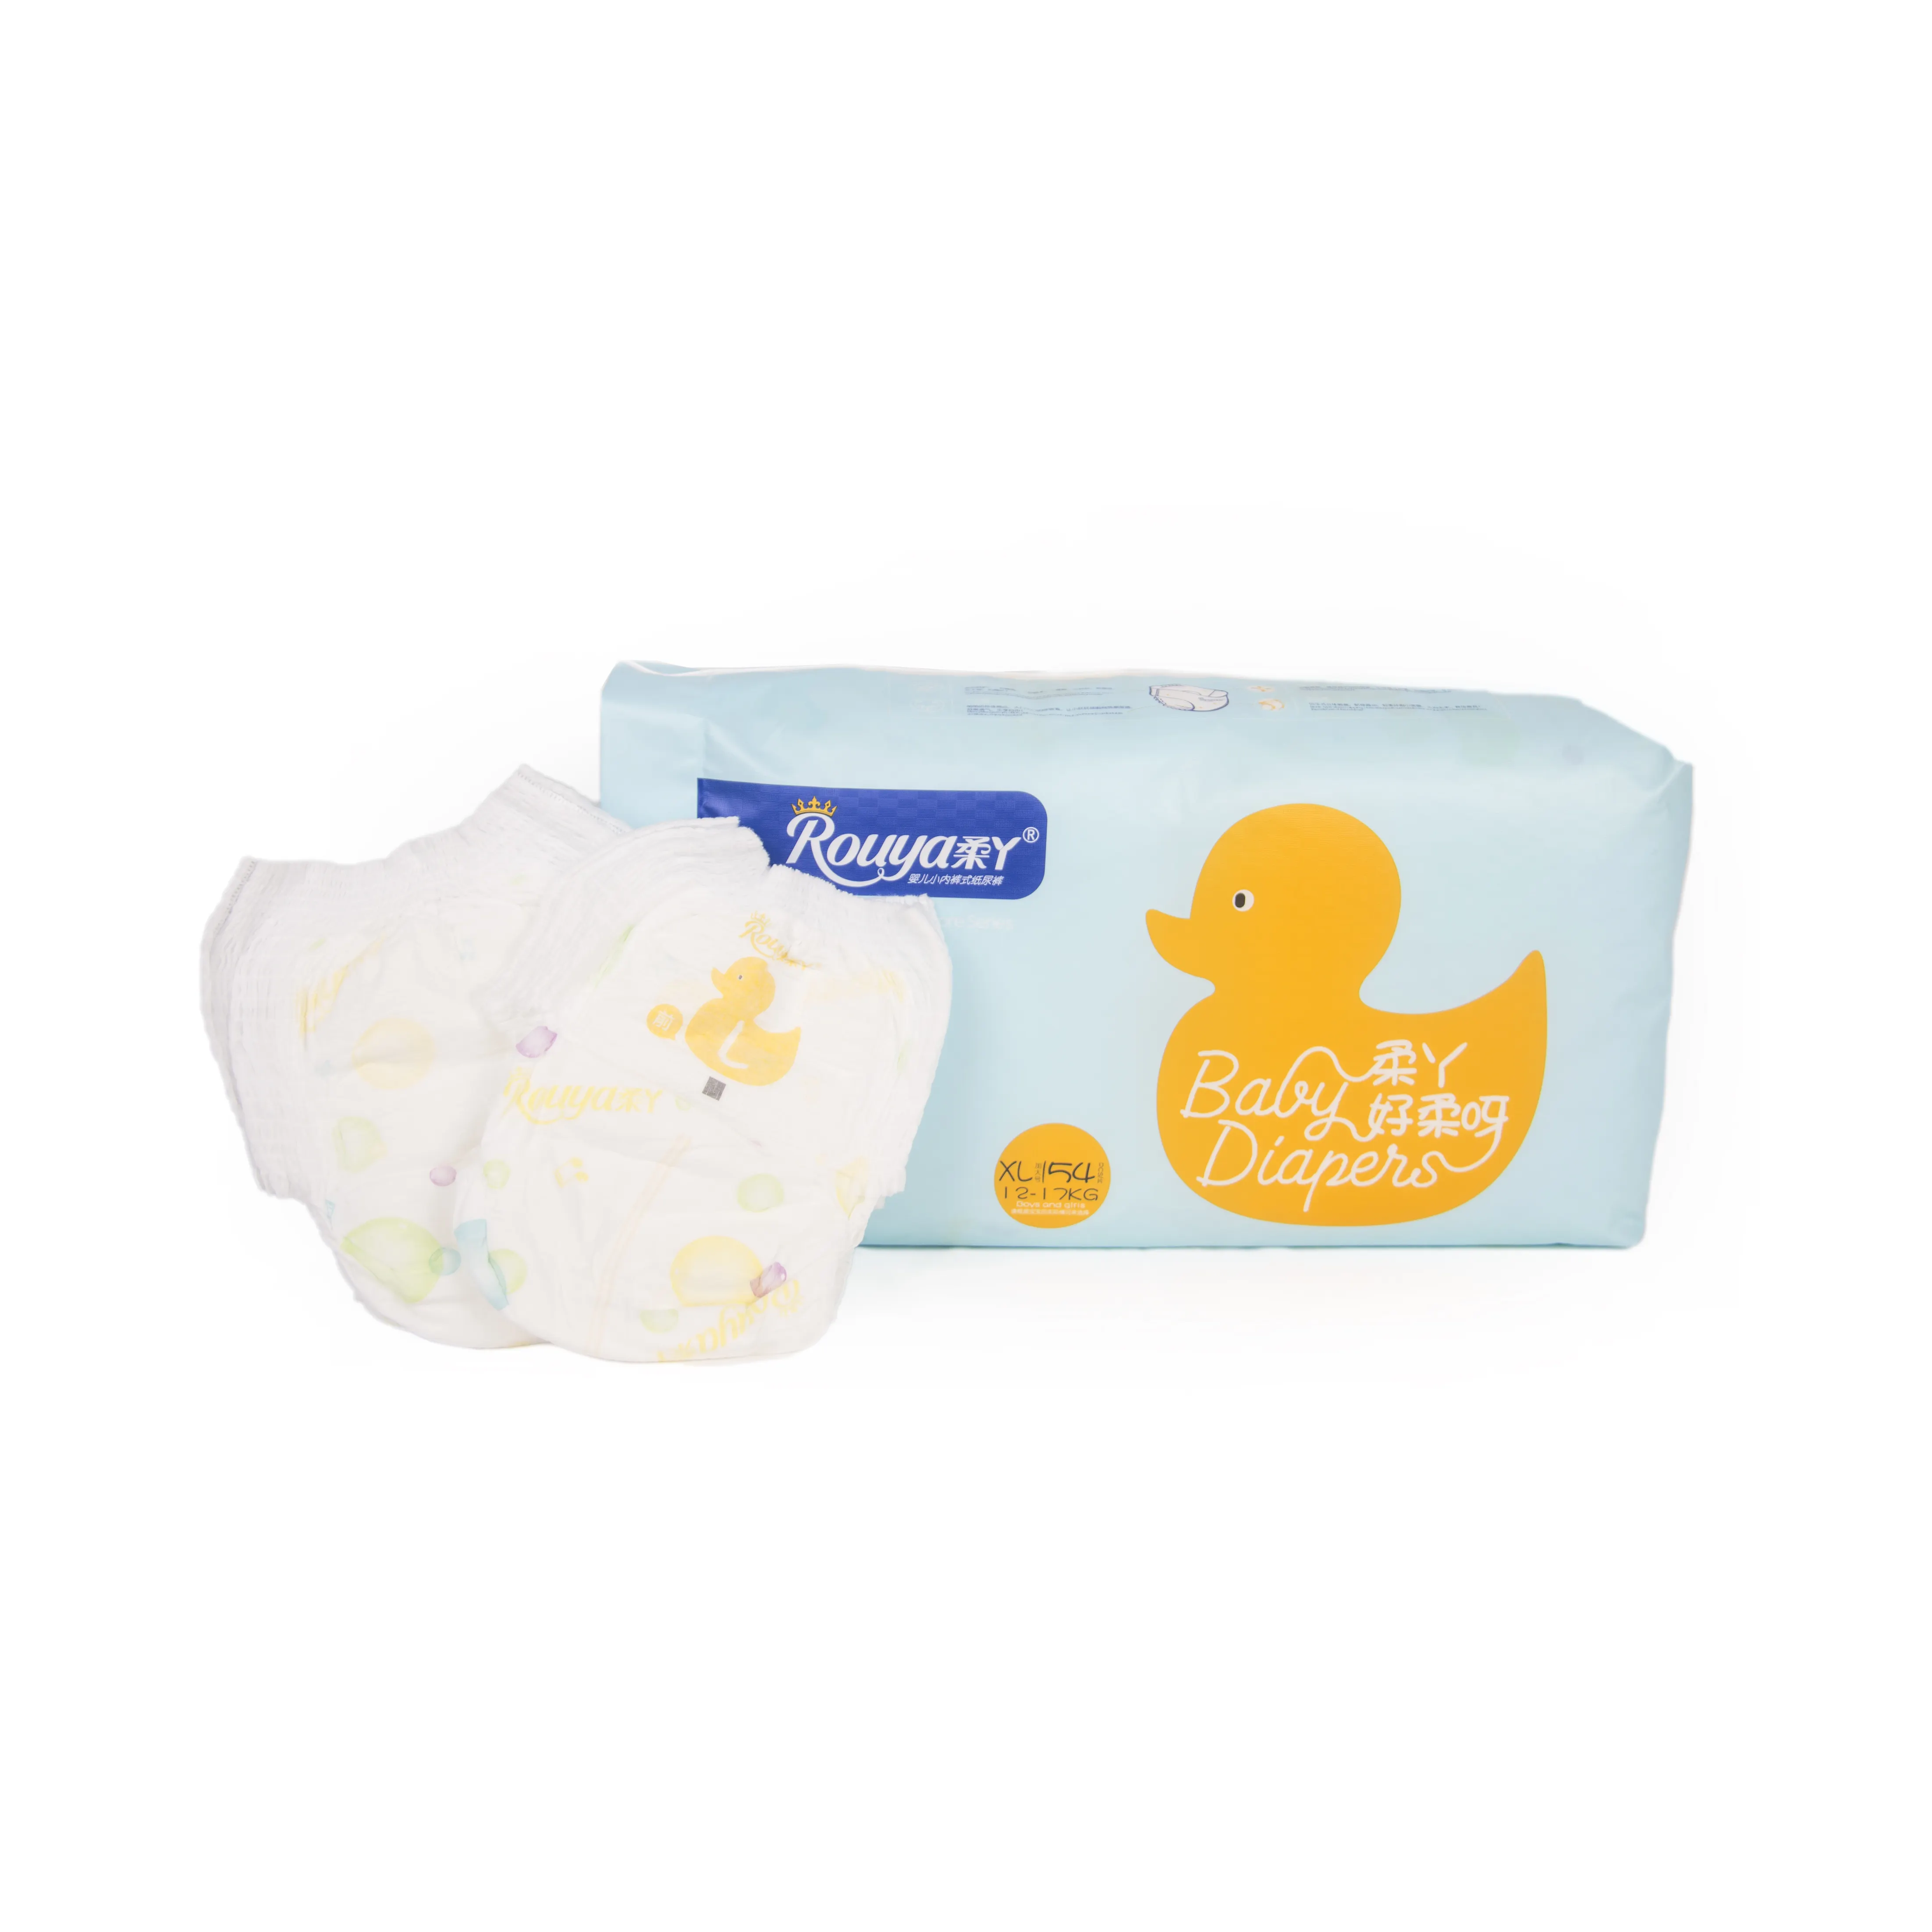 Free Baby Samples Diaper Superdry Cheap Bambini Pannolino Disposable Kids hot baby diapers